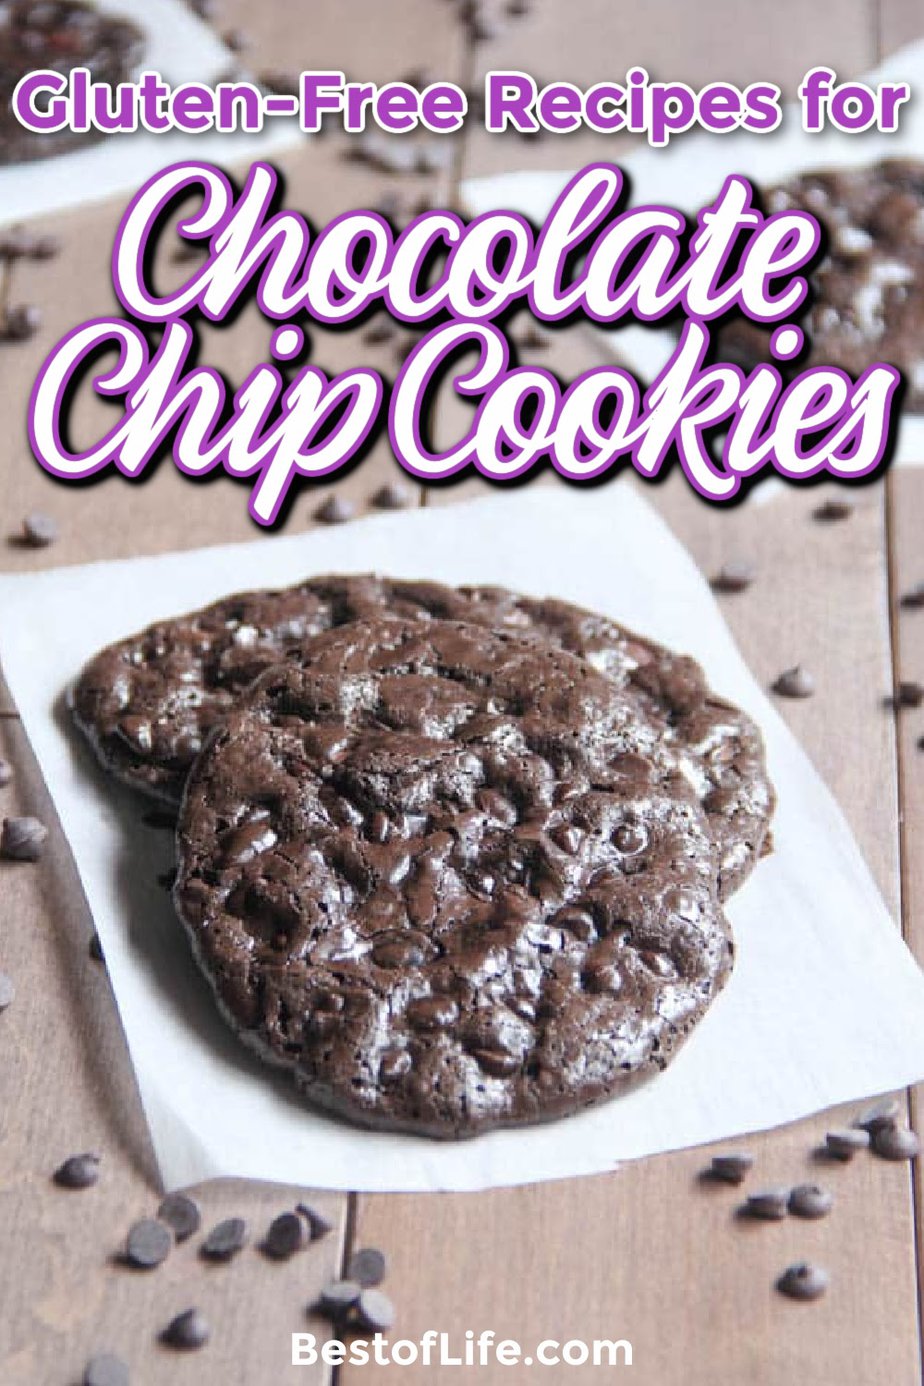 Whether you have a dietary restriction or just want to eat healthier, these gluten free chocolate chip cookies recipes will help you savor every bite. Best Chocolate Chip Cookie Recipe | Best Gluten Free Cookie Recipe | Easy Gluten Free Cookie Recipe | Easy Chocolate Chip Cookie Recipe | Healthy Chocolate Chip Cookie Recipe | Gluten Free Dessert Recipes | Gluten Free Snack Recipes | Healthy Snack Ideas | Homemade Snack Ideas #glutenfree #dessertrecipes via @thebestoflife